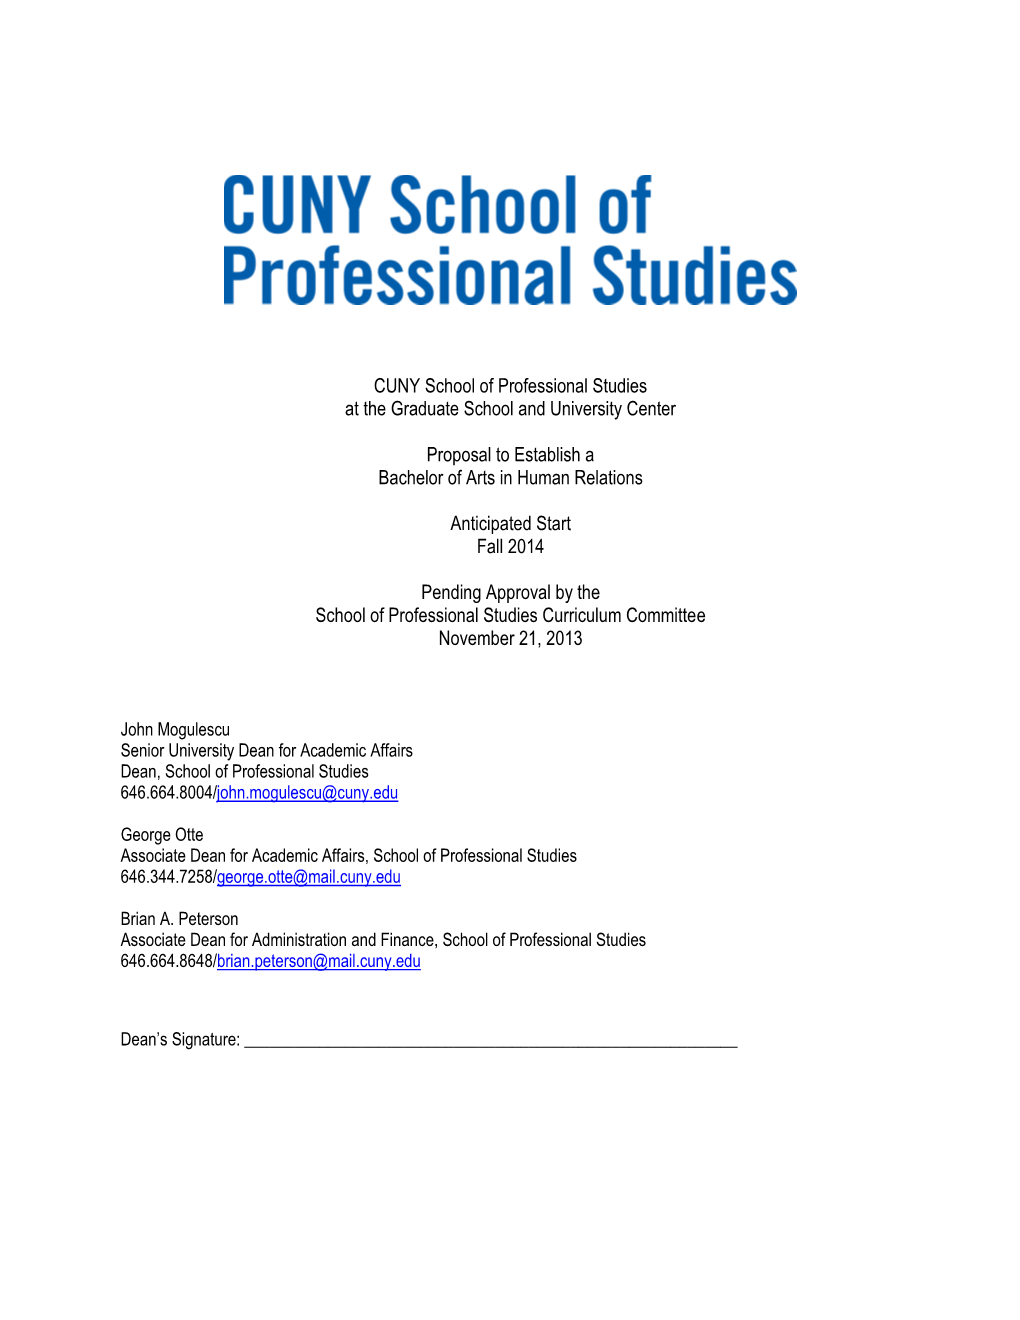 CUNY School of Professional Studies at the Graduate School and University Center